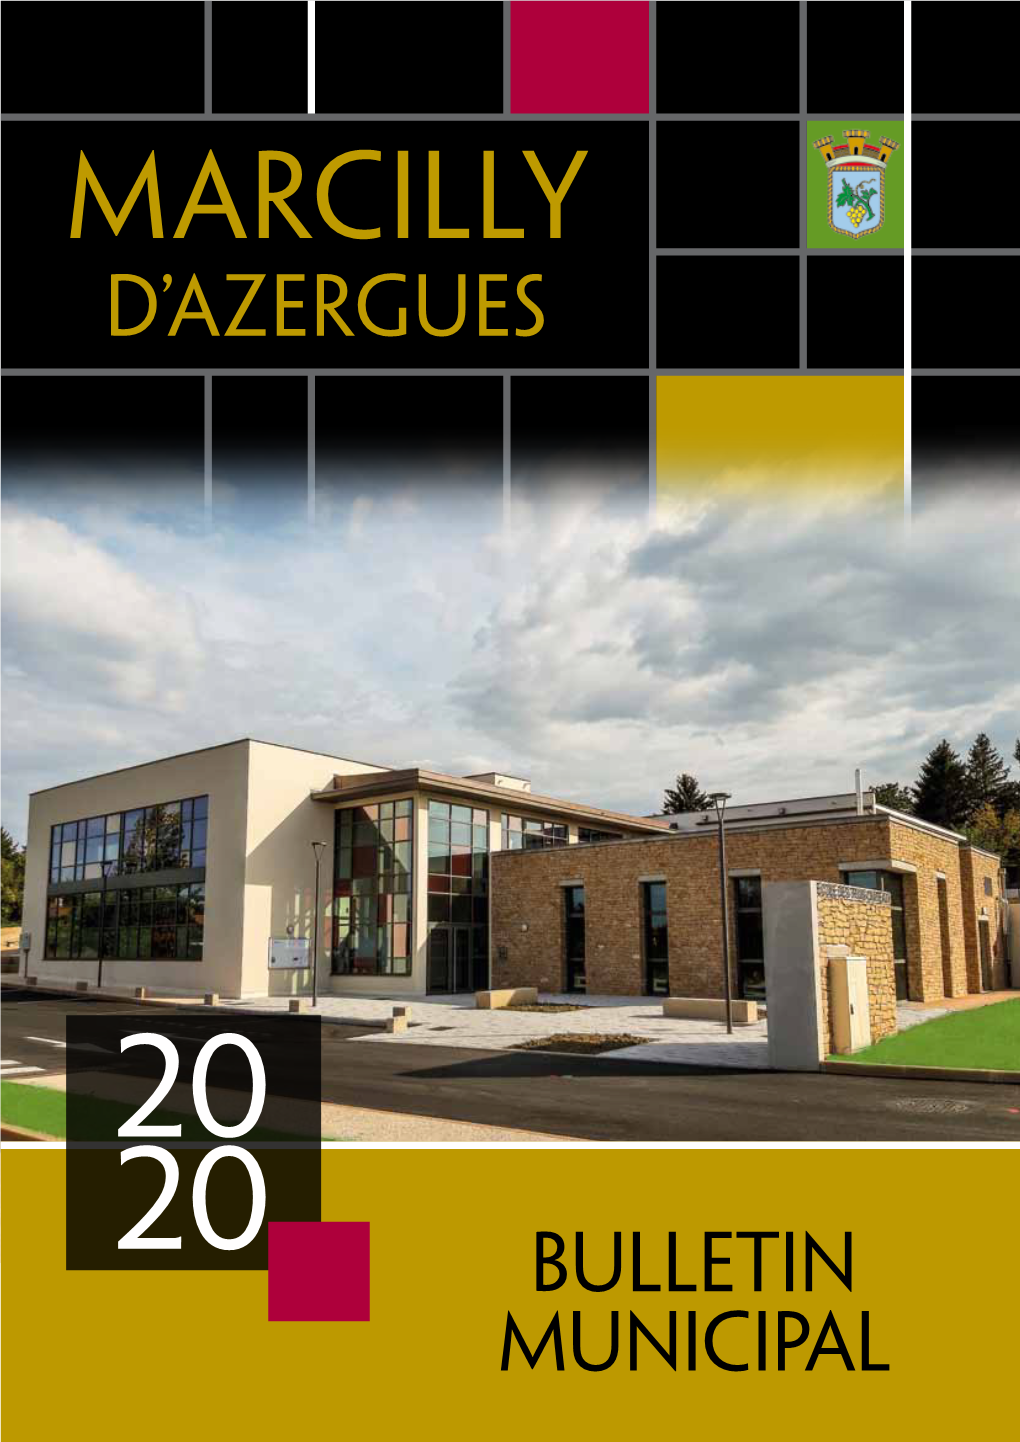 Marcilly D’Azergues